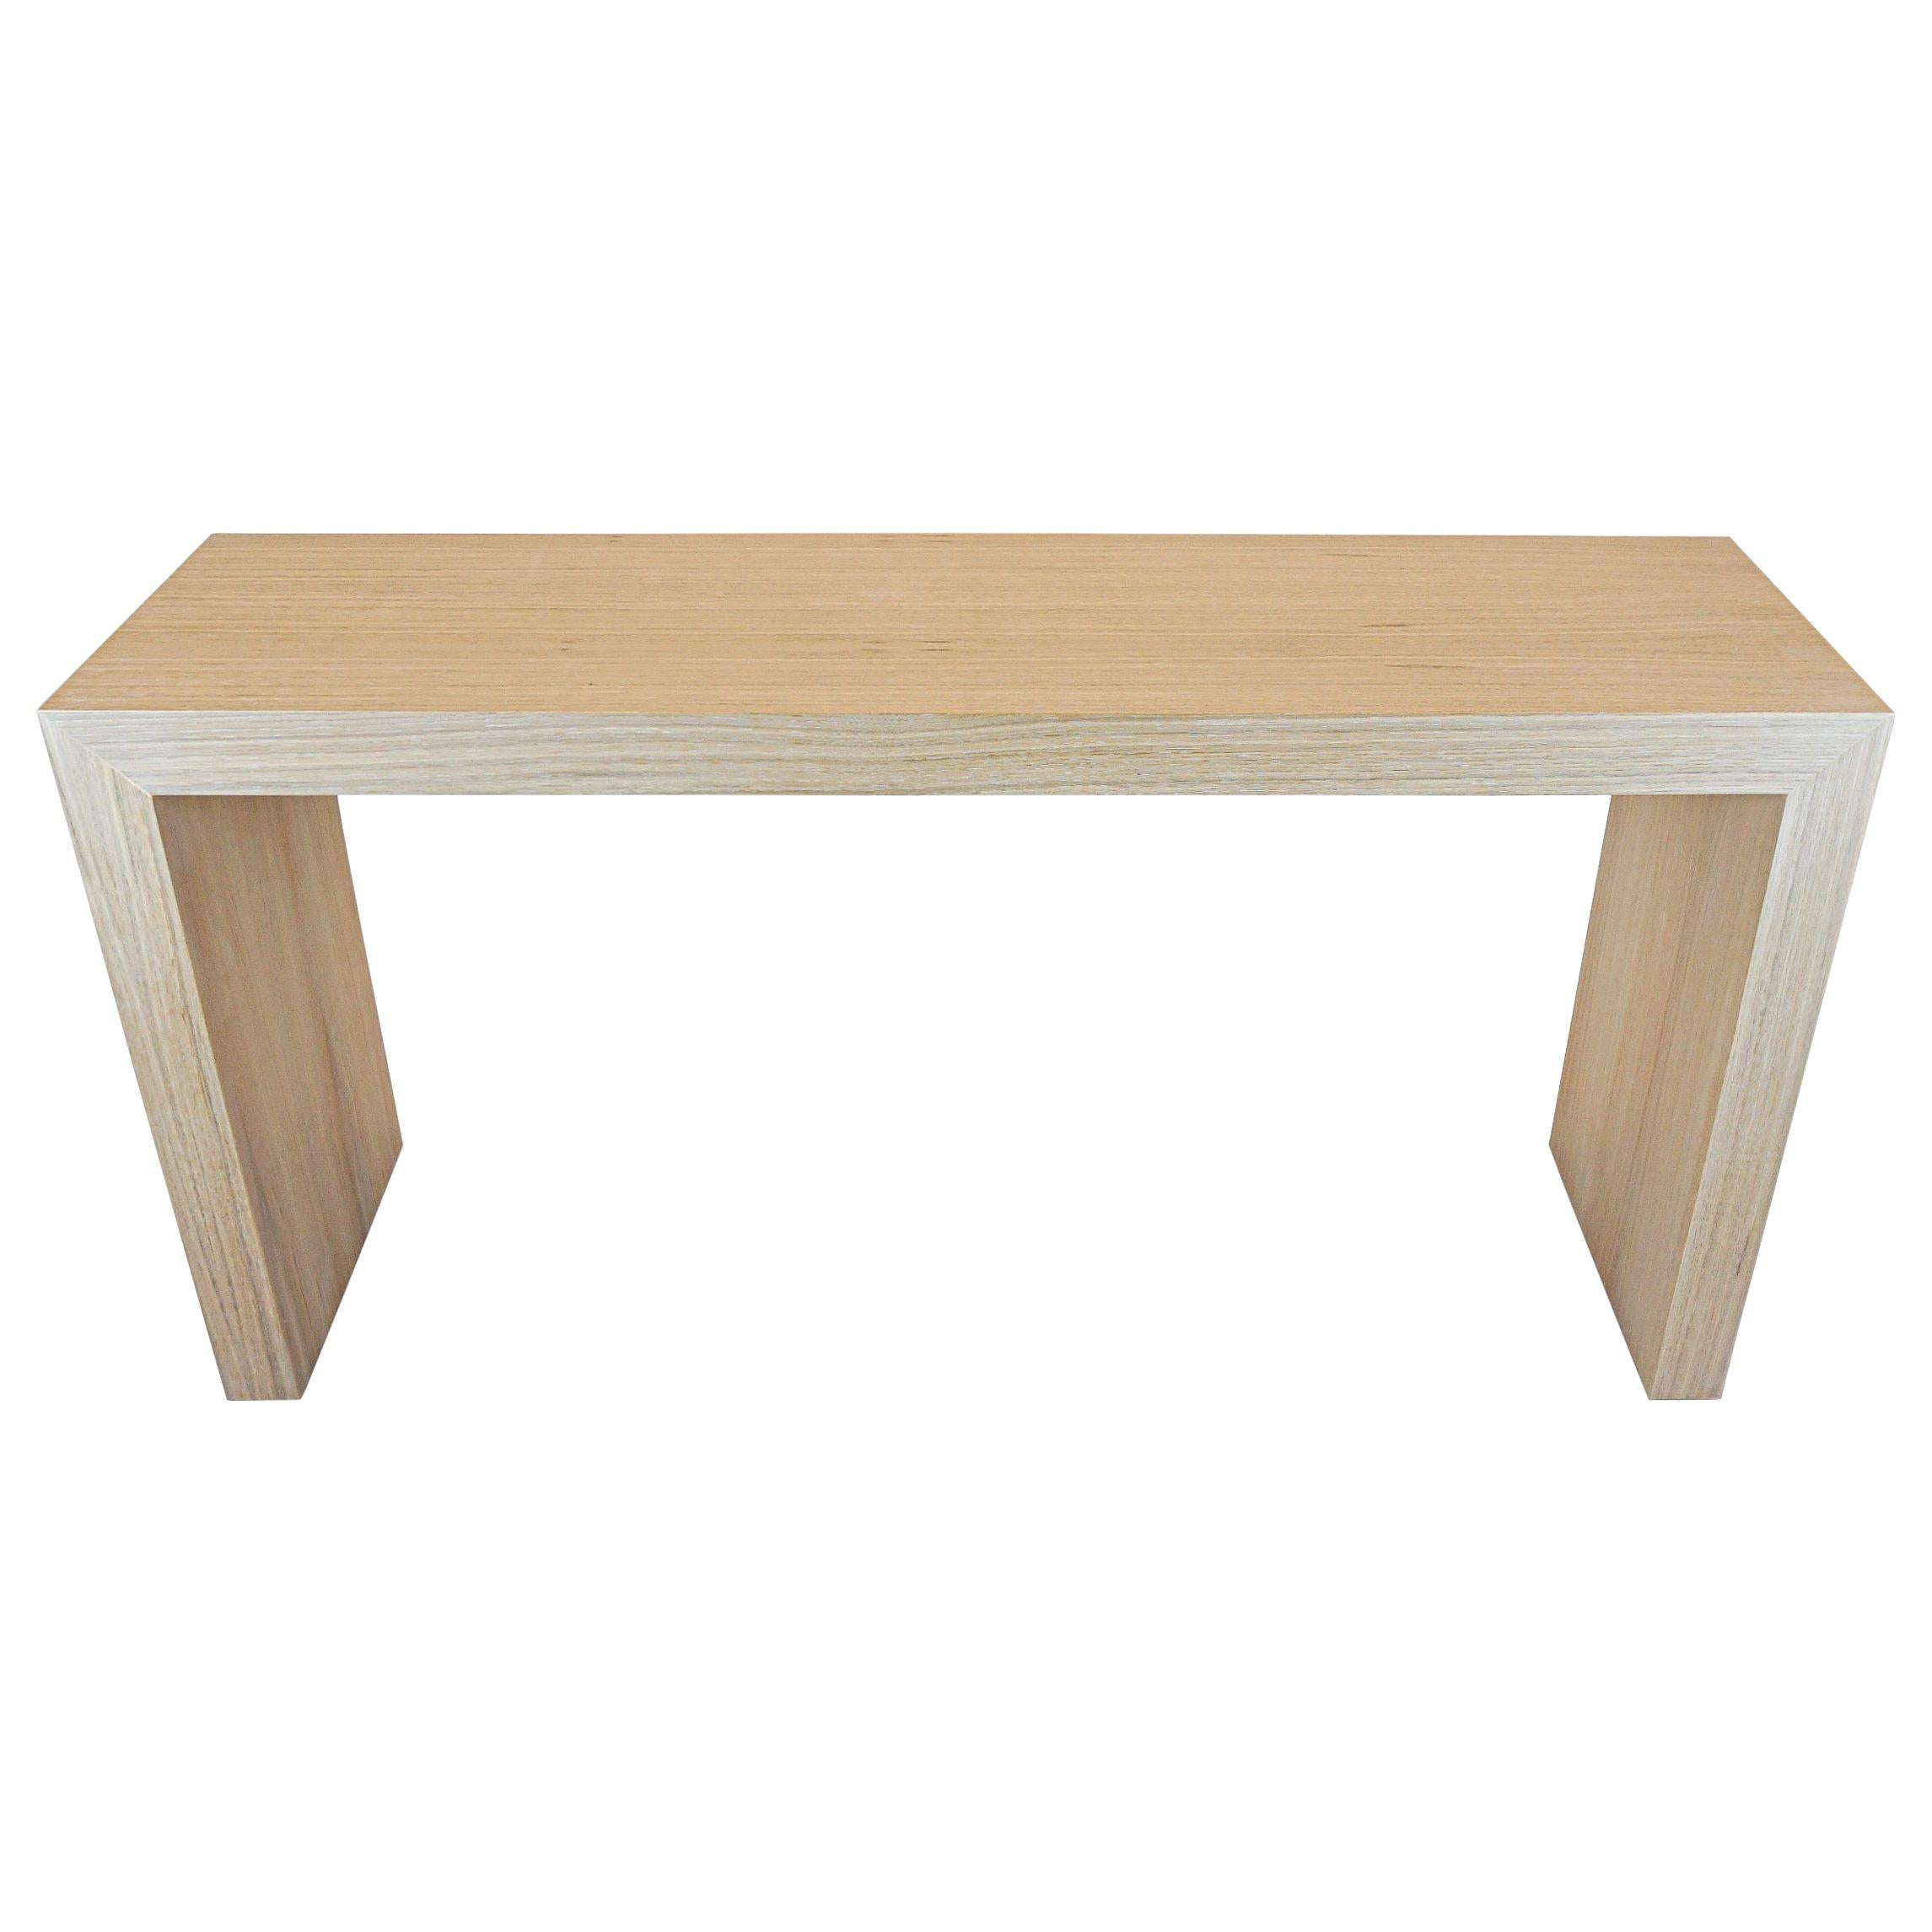 White Oak Veneer Waterfall Console with Clear Finish For Sale